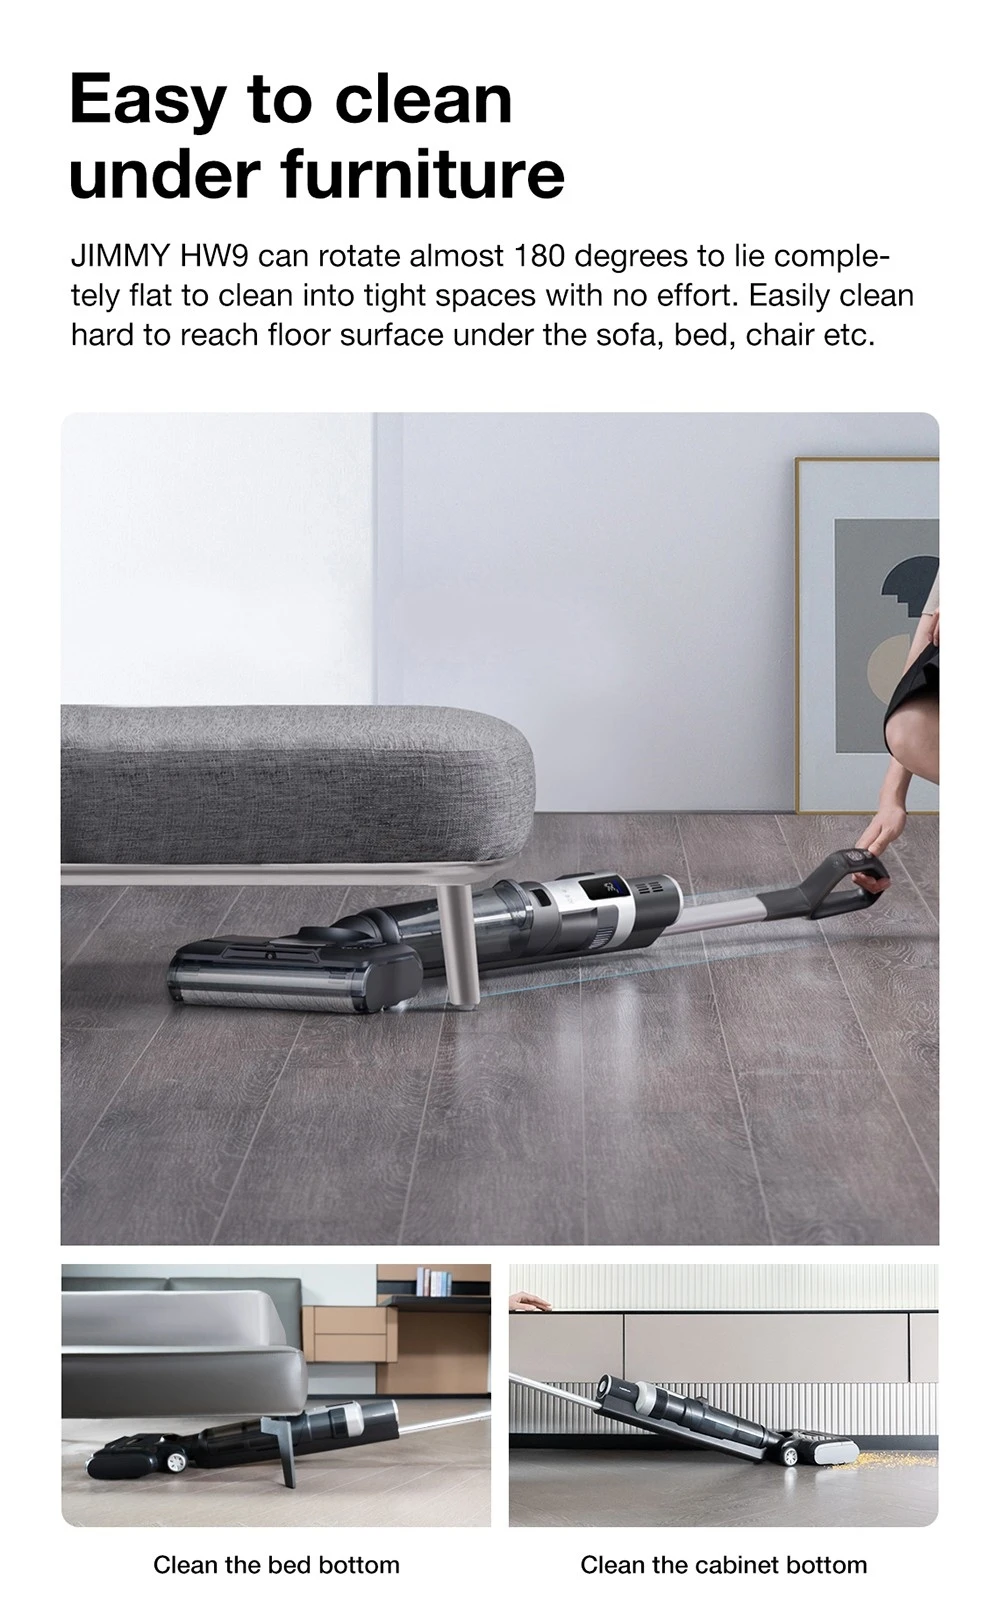 JIMMY HW9 Cordless Wet and Dry Vacuum Cleaner, Self-Cleaning, 400ml Dust Water Tank, Waterproof Brushless Motor, Water Spray Control, LED Display